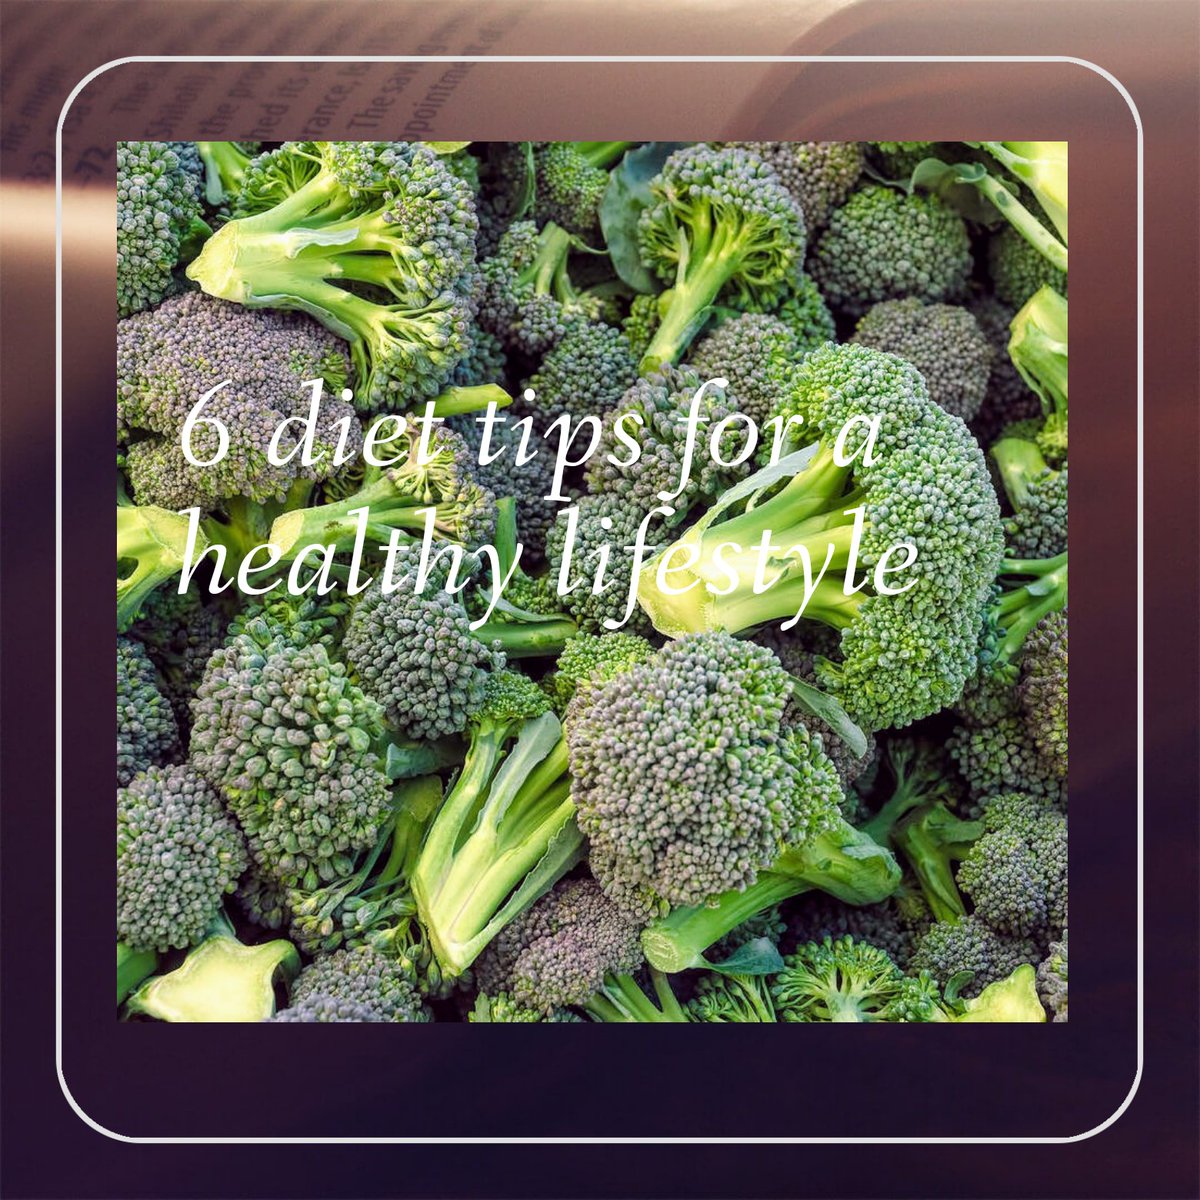 6 diet tips for a healthy lifestyle.
#wholegrains
#HealthyLiving
#HealthyFood 
#fattyfish
#protein
#nonstarchvegetables
#nutrition
africanutritionscience.wordpress.com/2020/08/30/6-d…